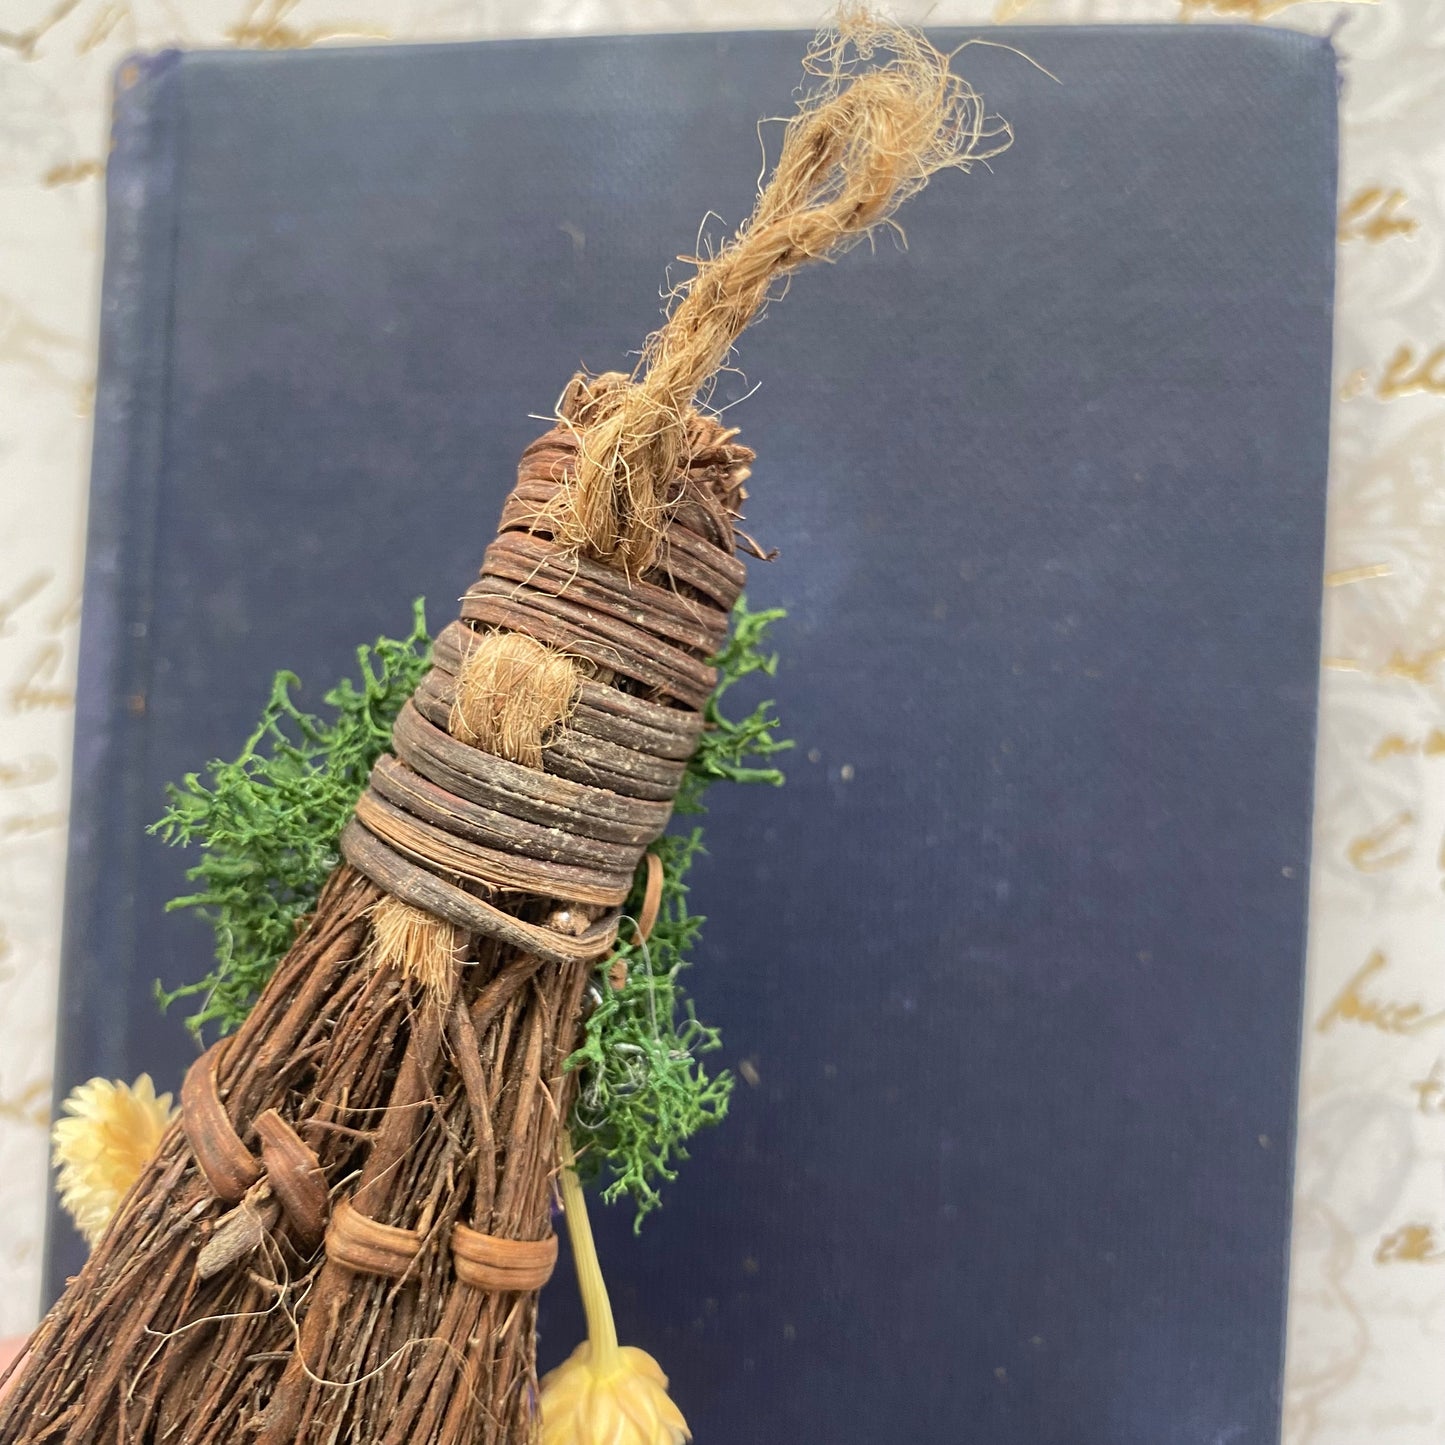 Mini scented blessing broom besom - forest moon with crystals and dried flowers